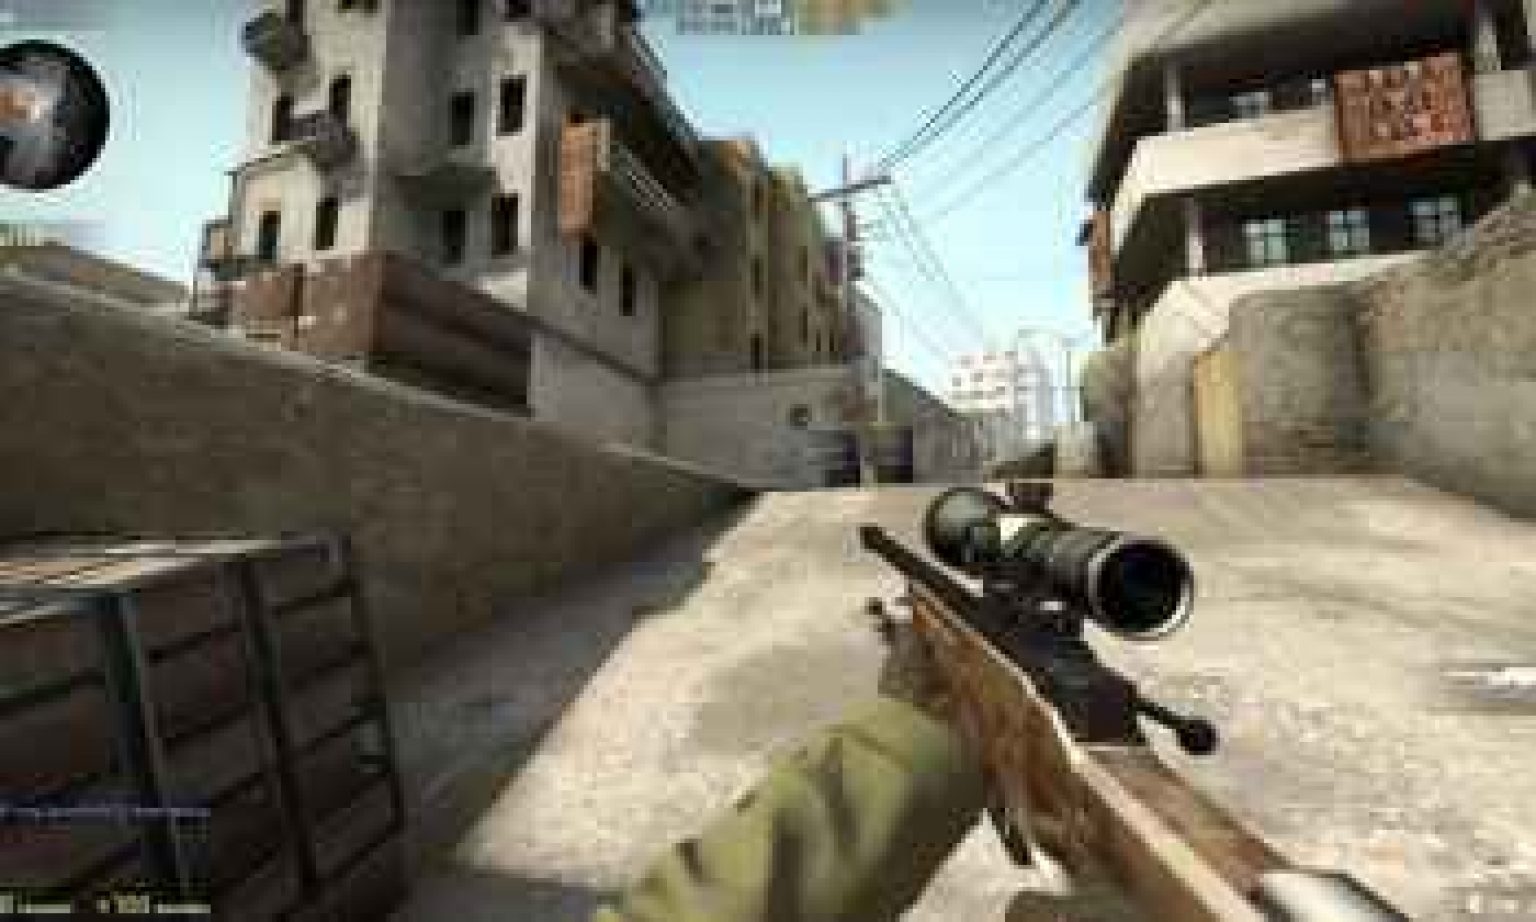 counter strike exe file download